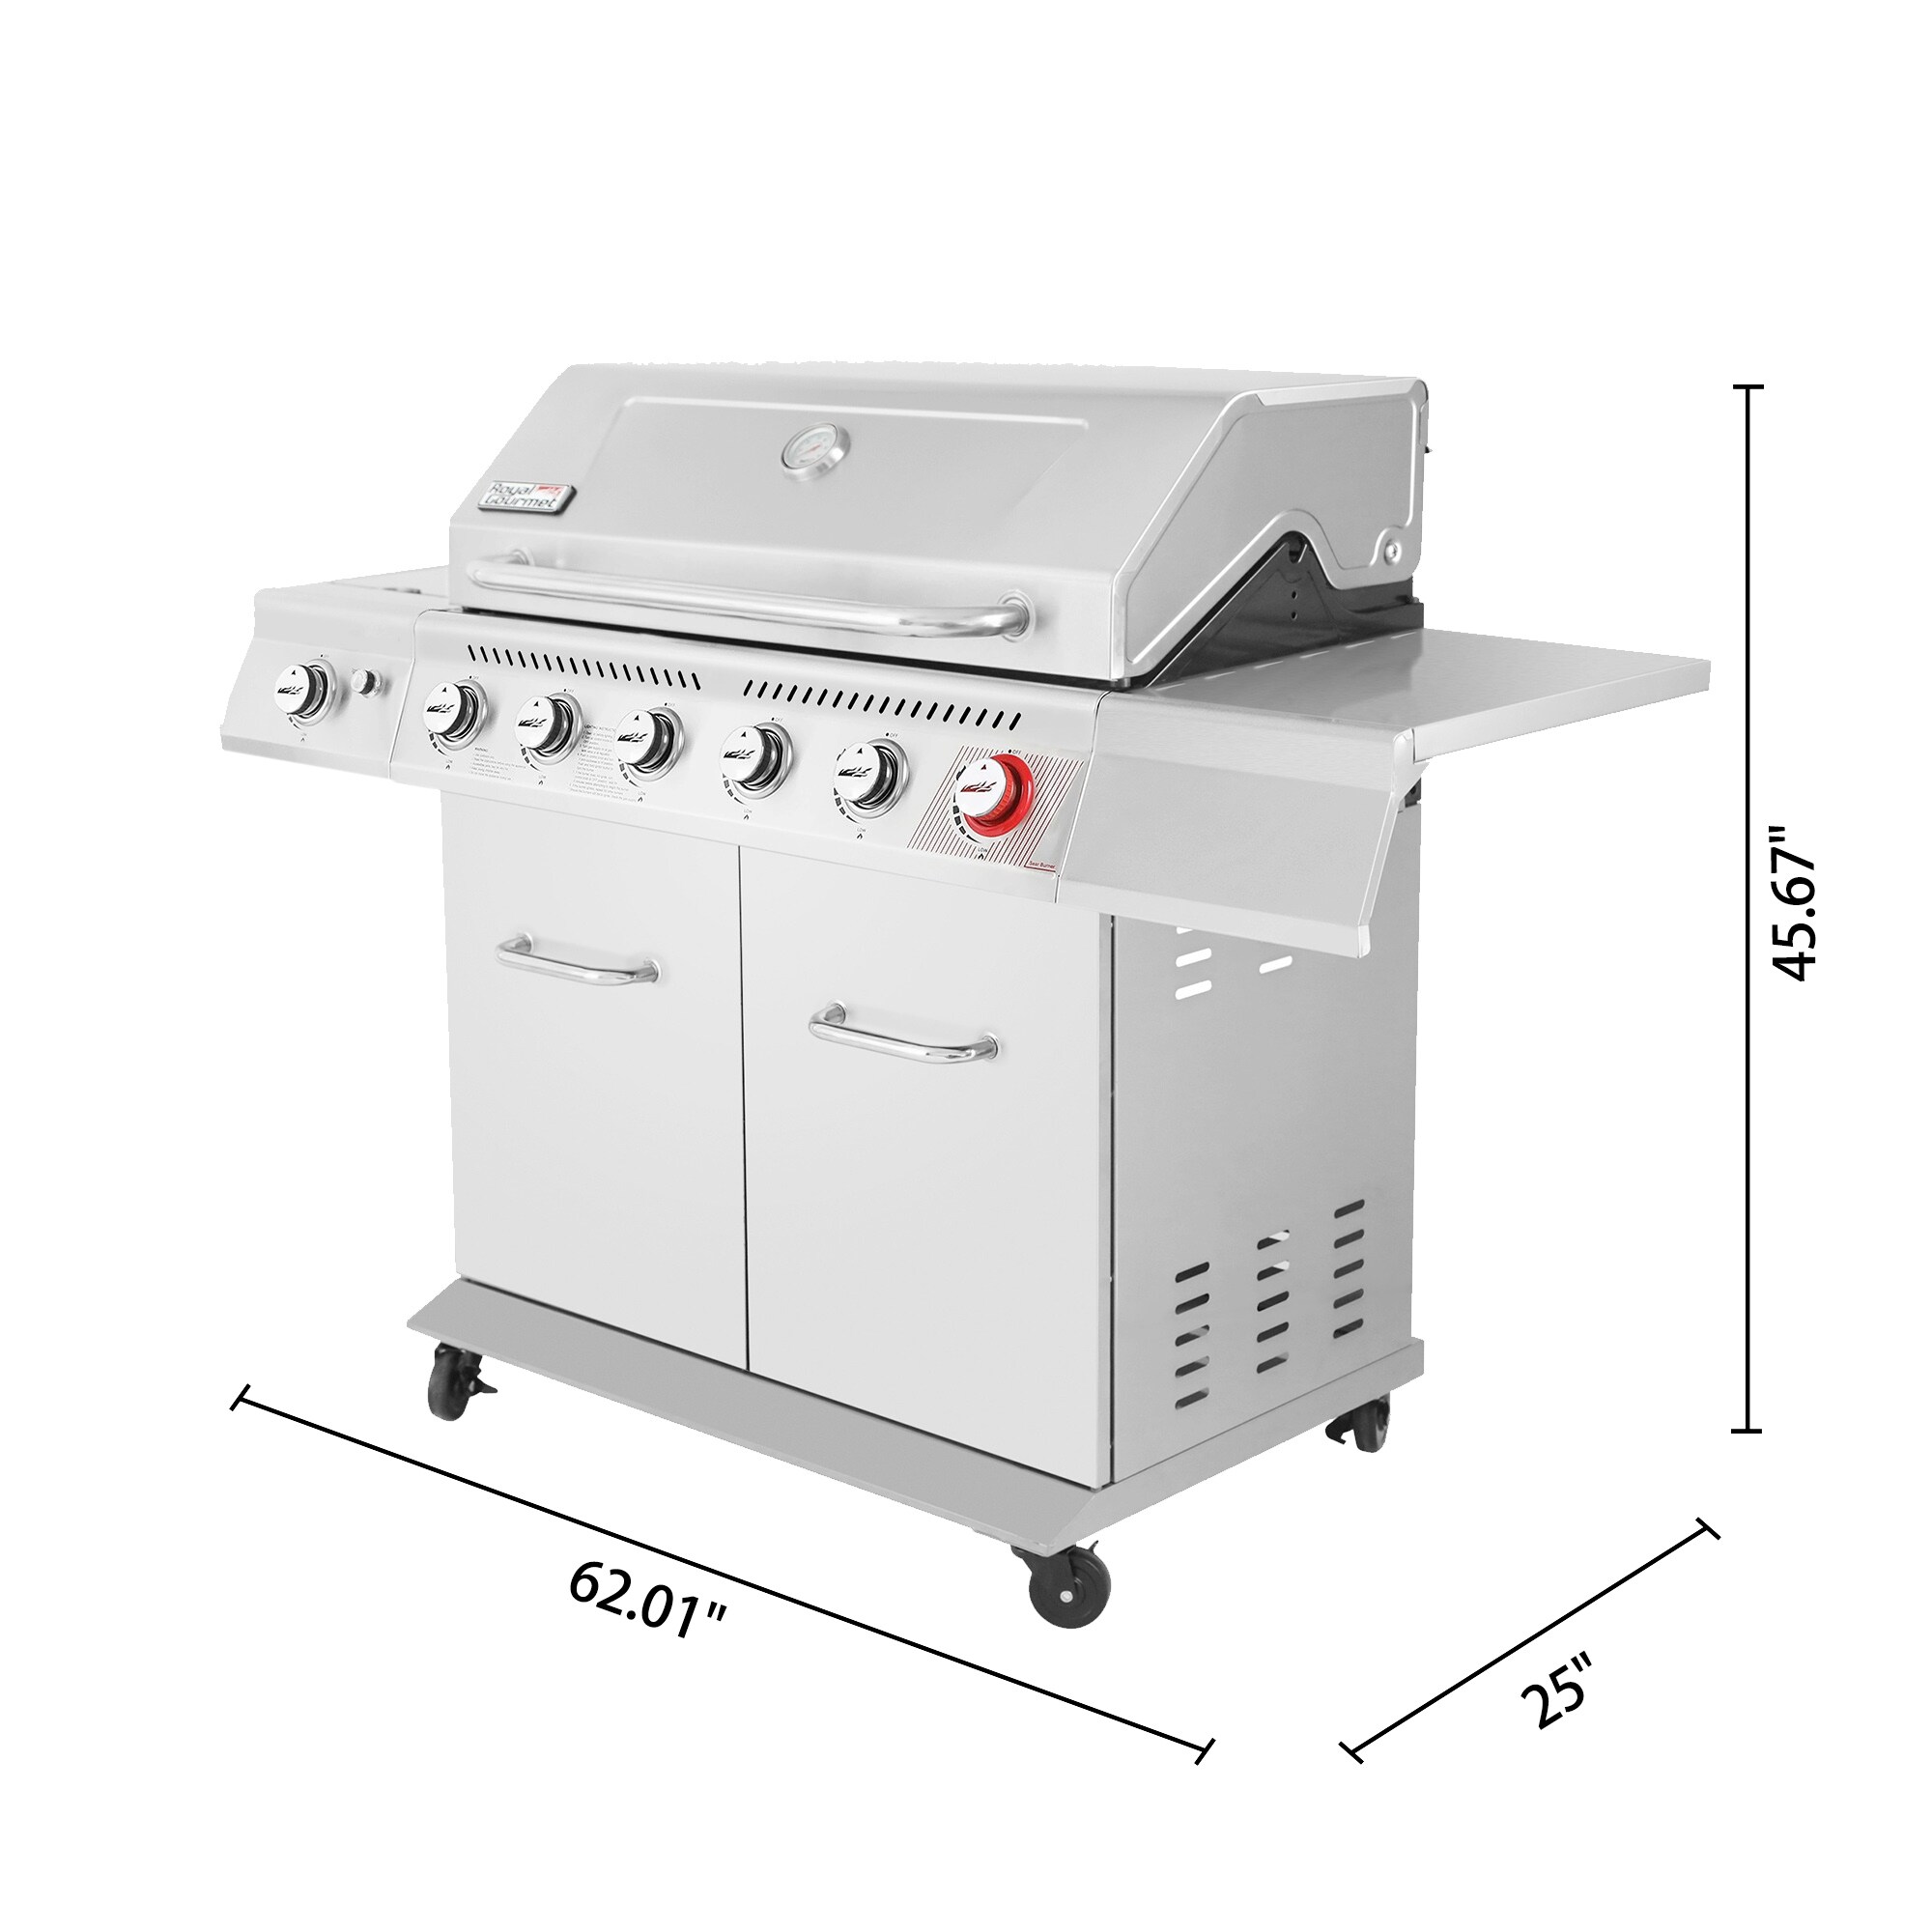 Side Sale On Steel - with Royal Gas Gourmet Silver - & Stainless Grill, Grill and Premier 36898562 Burner Bed - 6-Burner Burner, Sear Bath BBQ Beyond